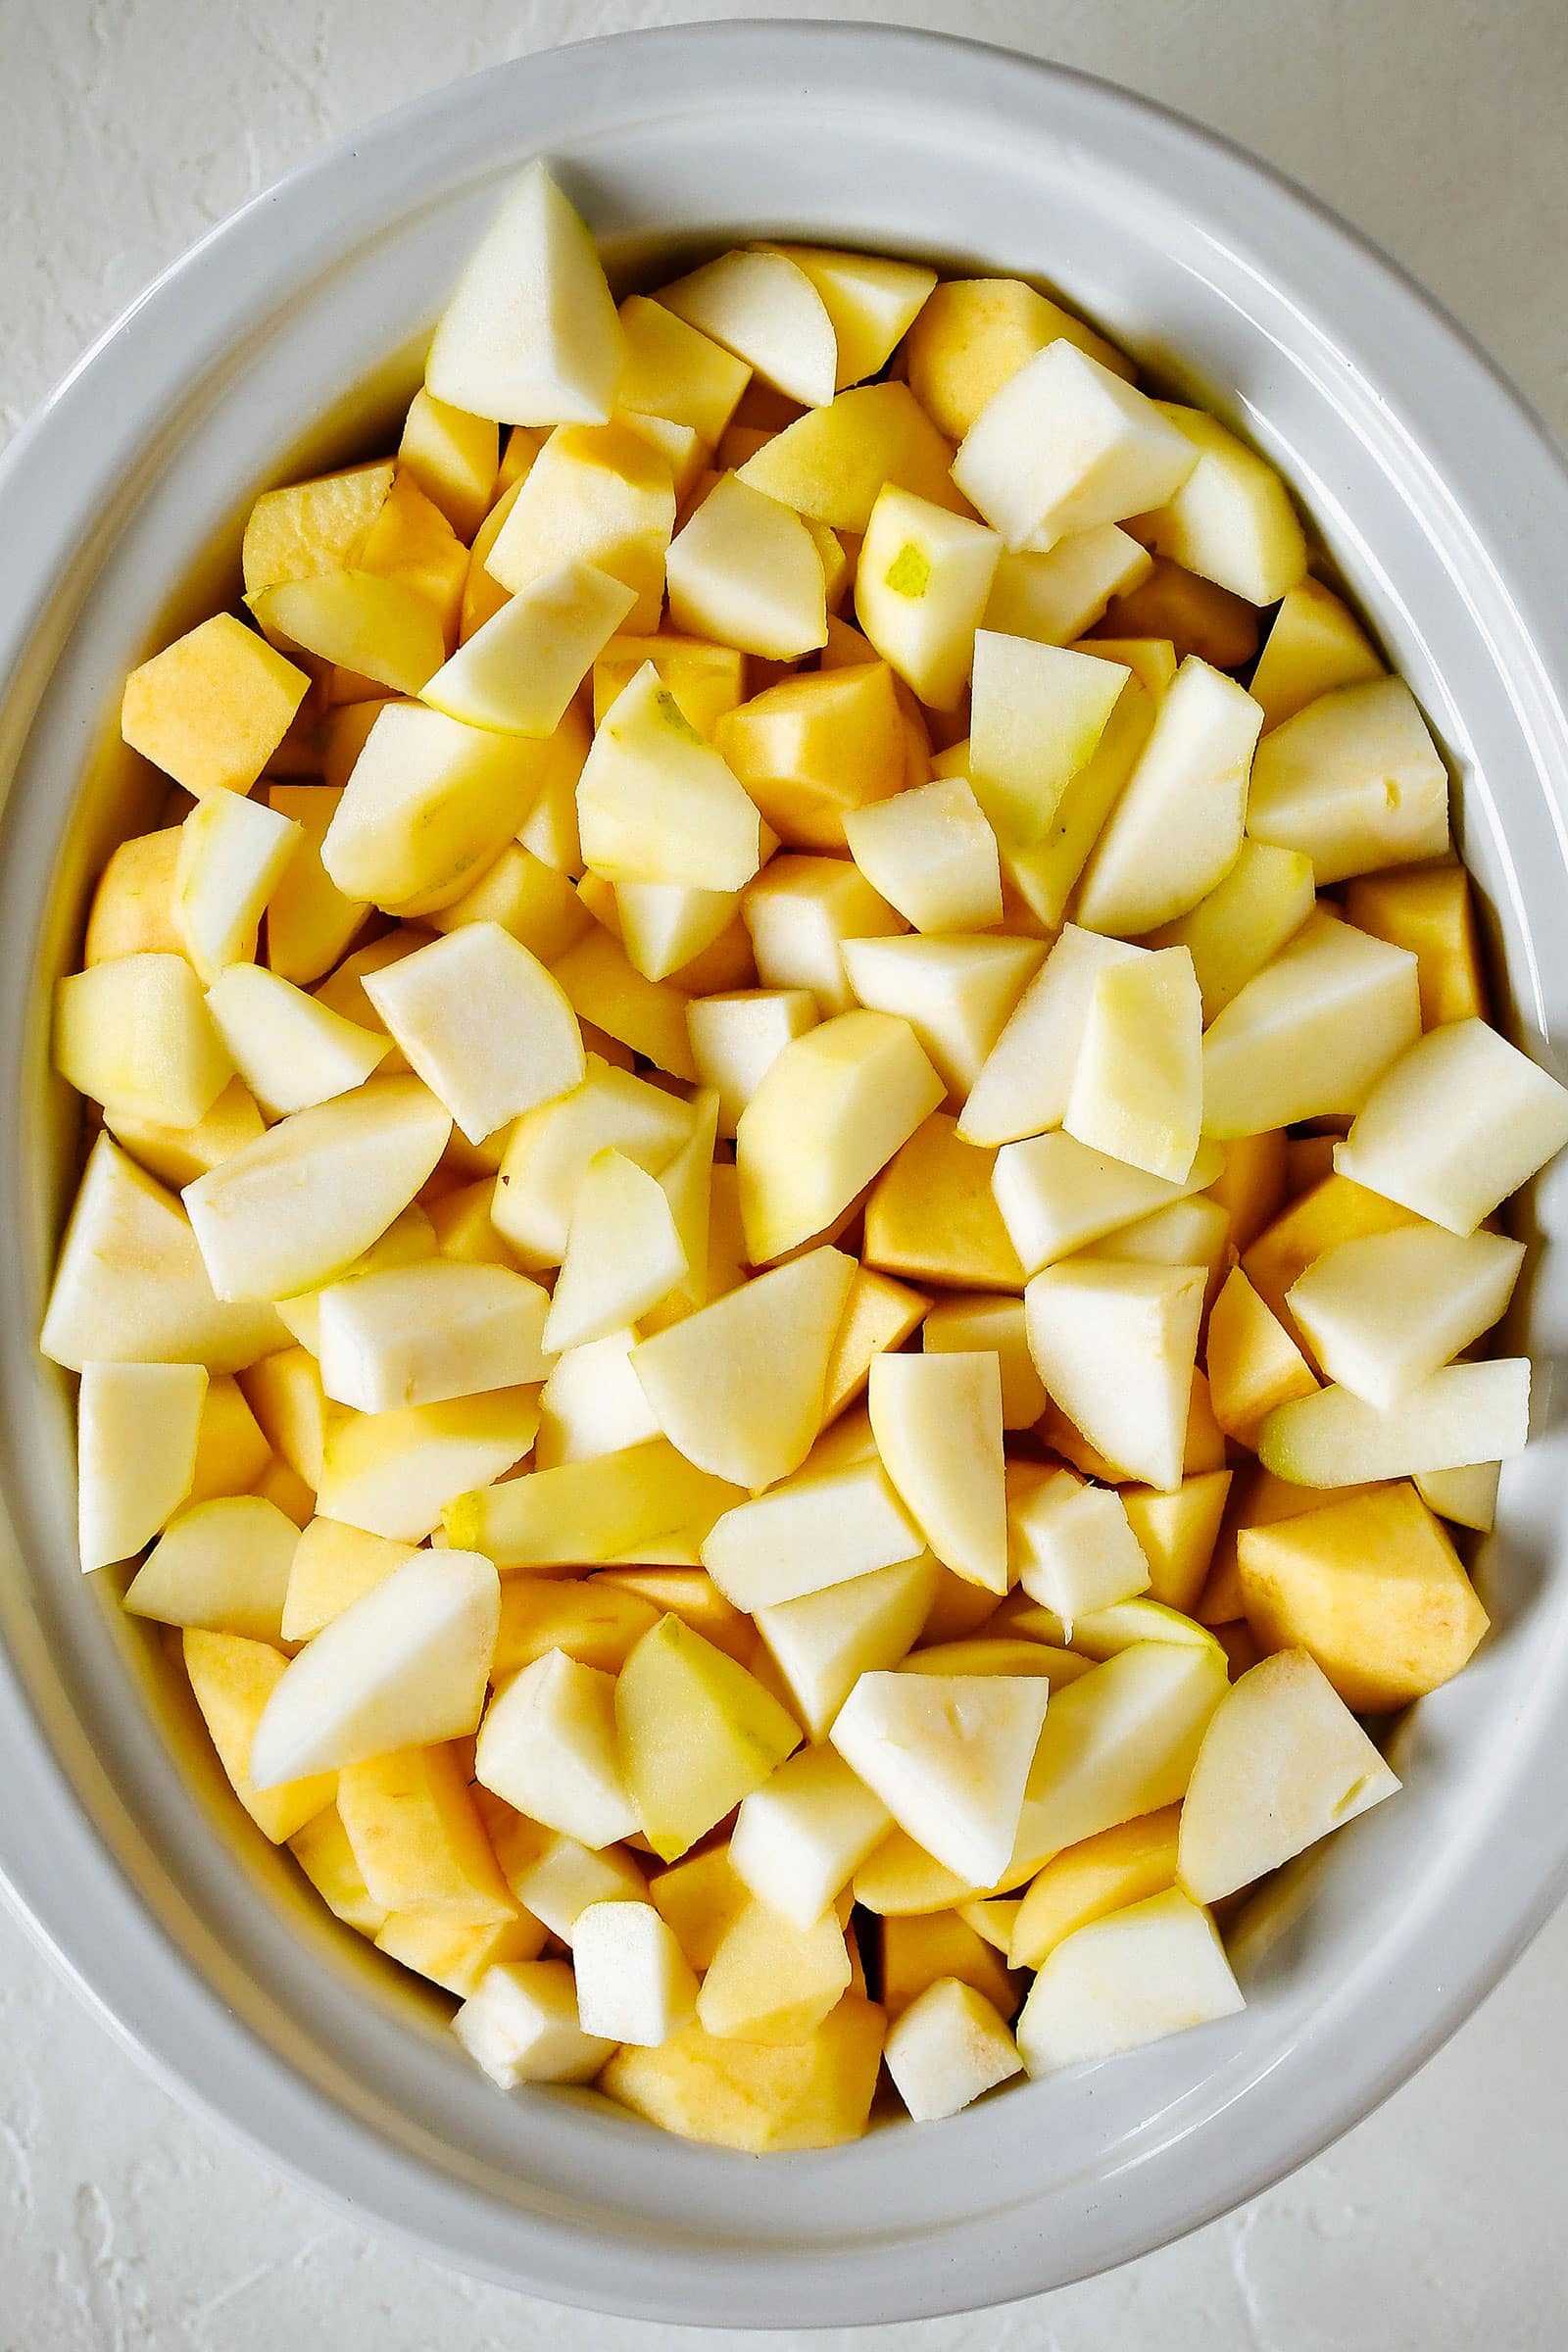 Overhead shot of a crockpot filled to the brim with peeled and chopped apples and pears